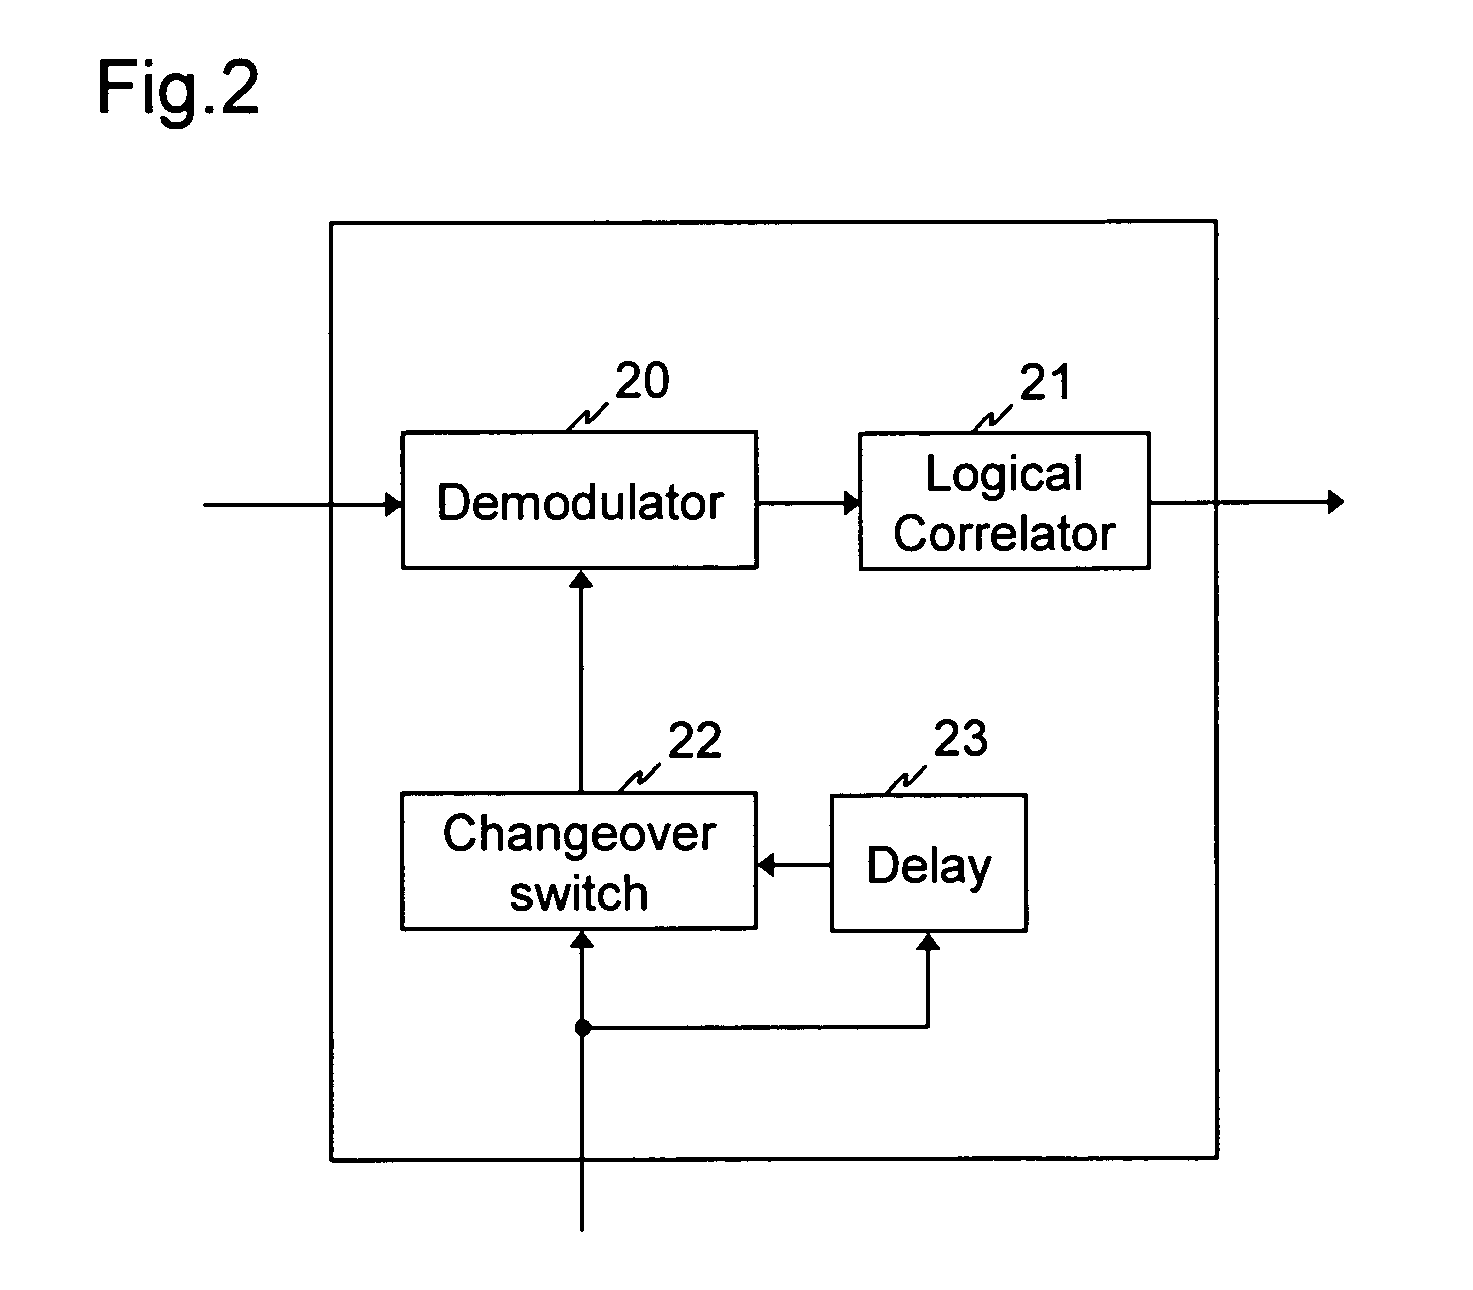 Transmitting and receiving device for a multipoint-to-point network